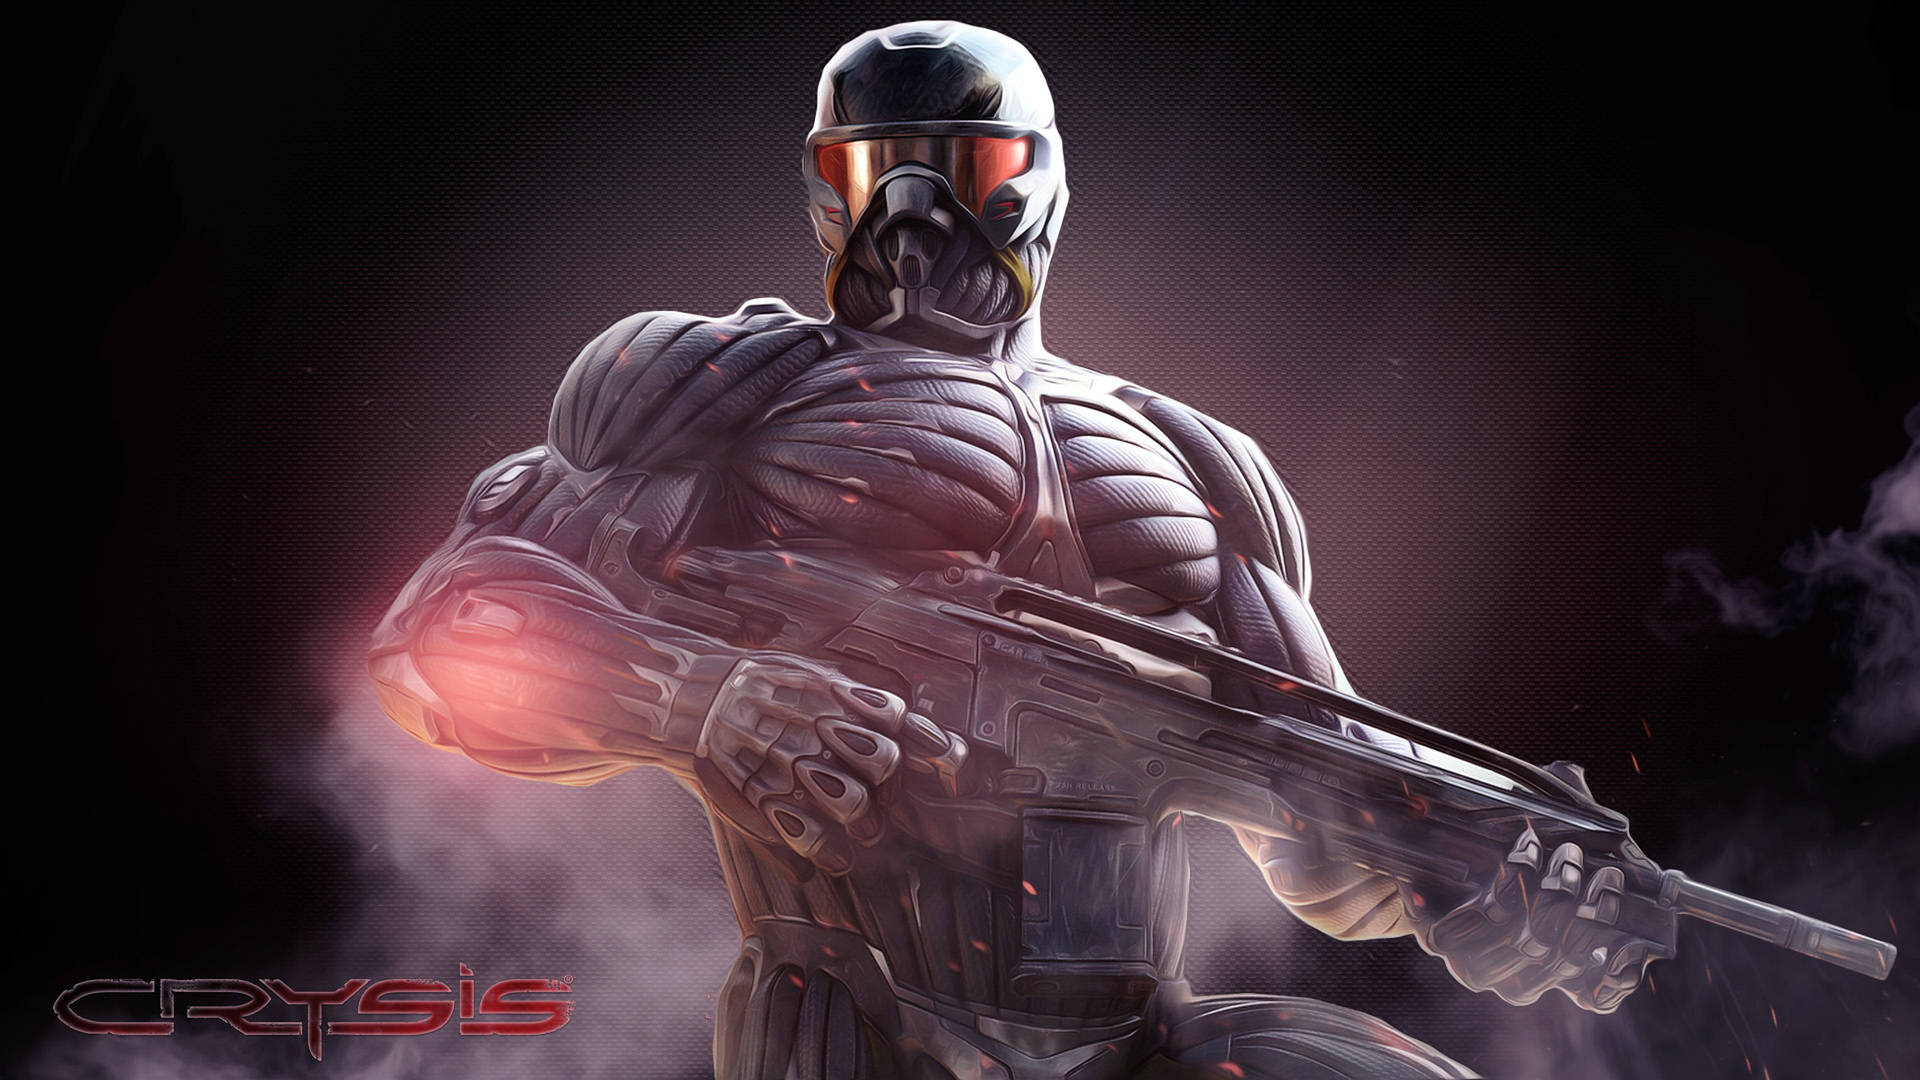 Free download Crysis 3 Background 19201080 24218 HD Wallpaper Res 1920x1080  1920x1080 for your Desktop Mobile  Tablet  Explore 44 Crysis 3  Wallpaper 1920x1080  Diablo 3 Wallpaper 1920x1080 Crysis Wallpaper Hd Crysis  3 Wallpaper